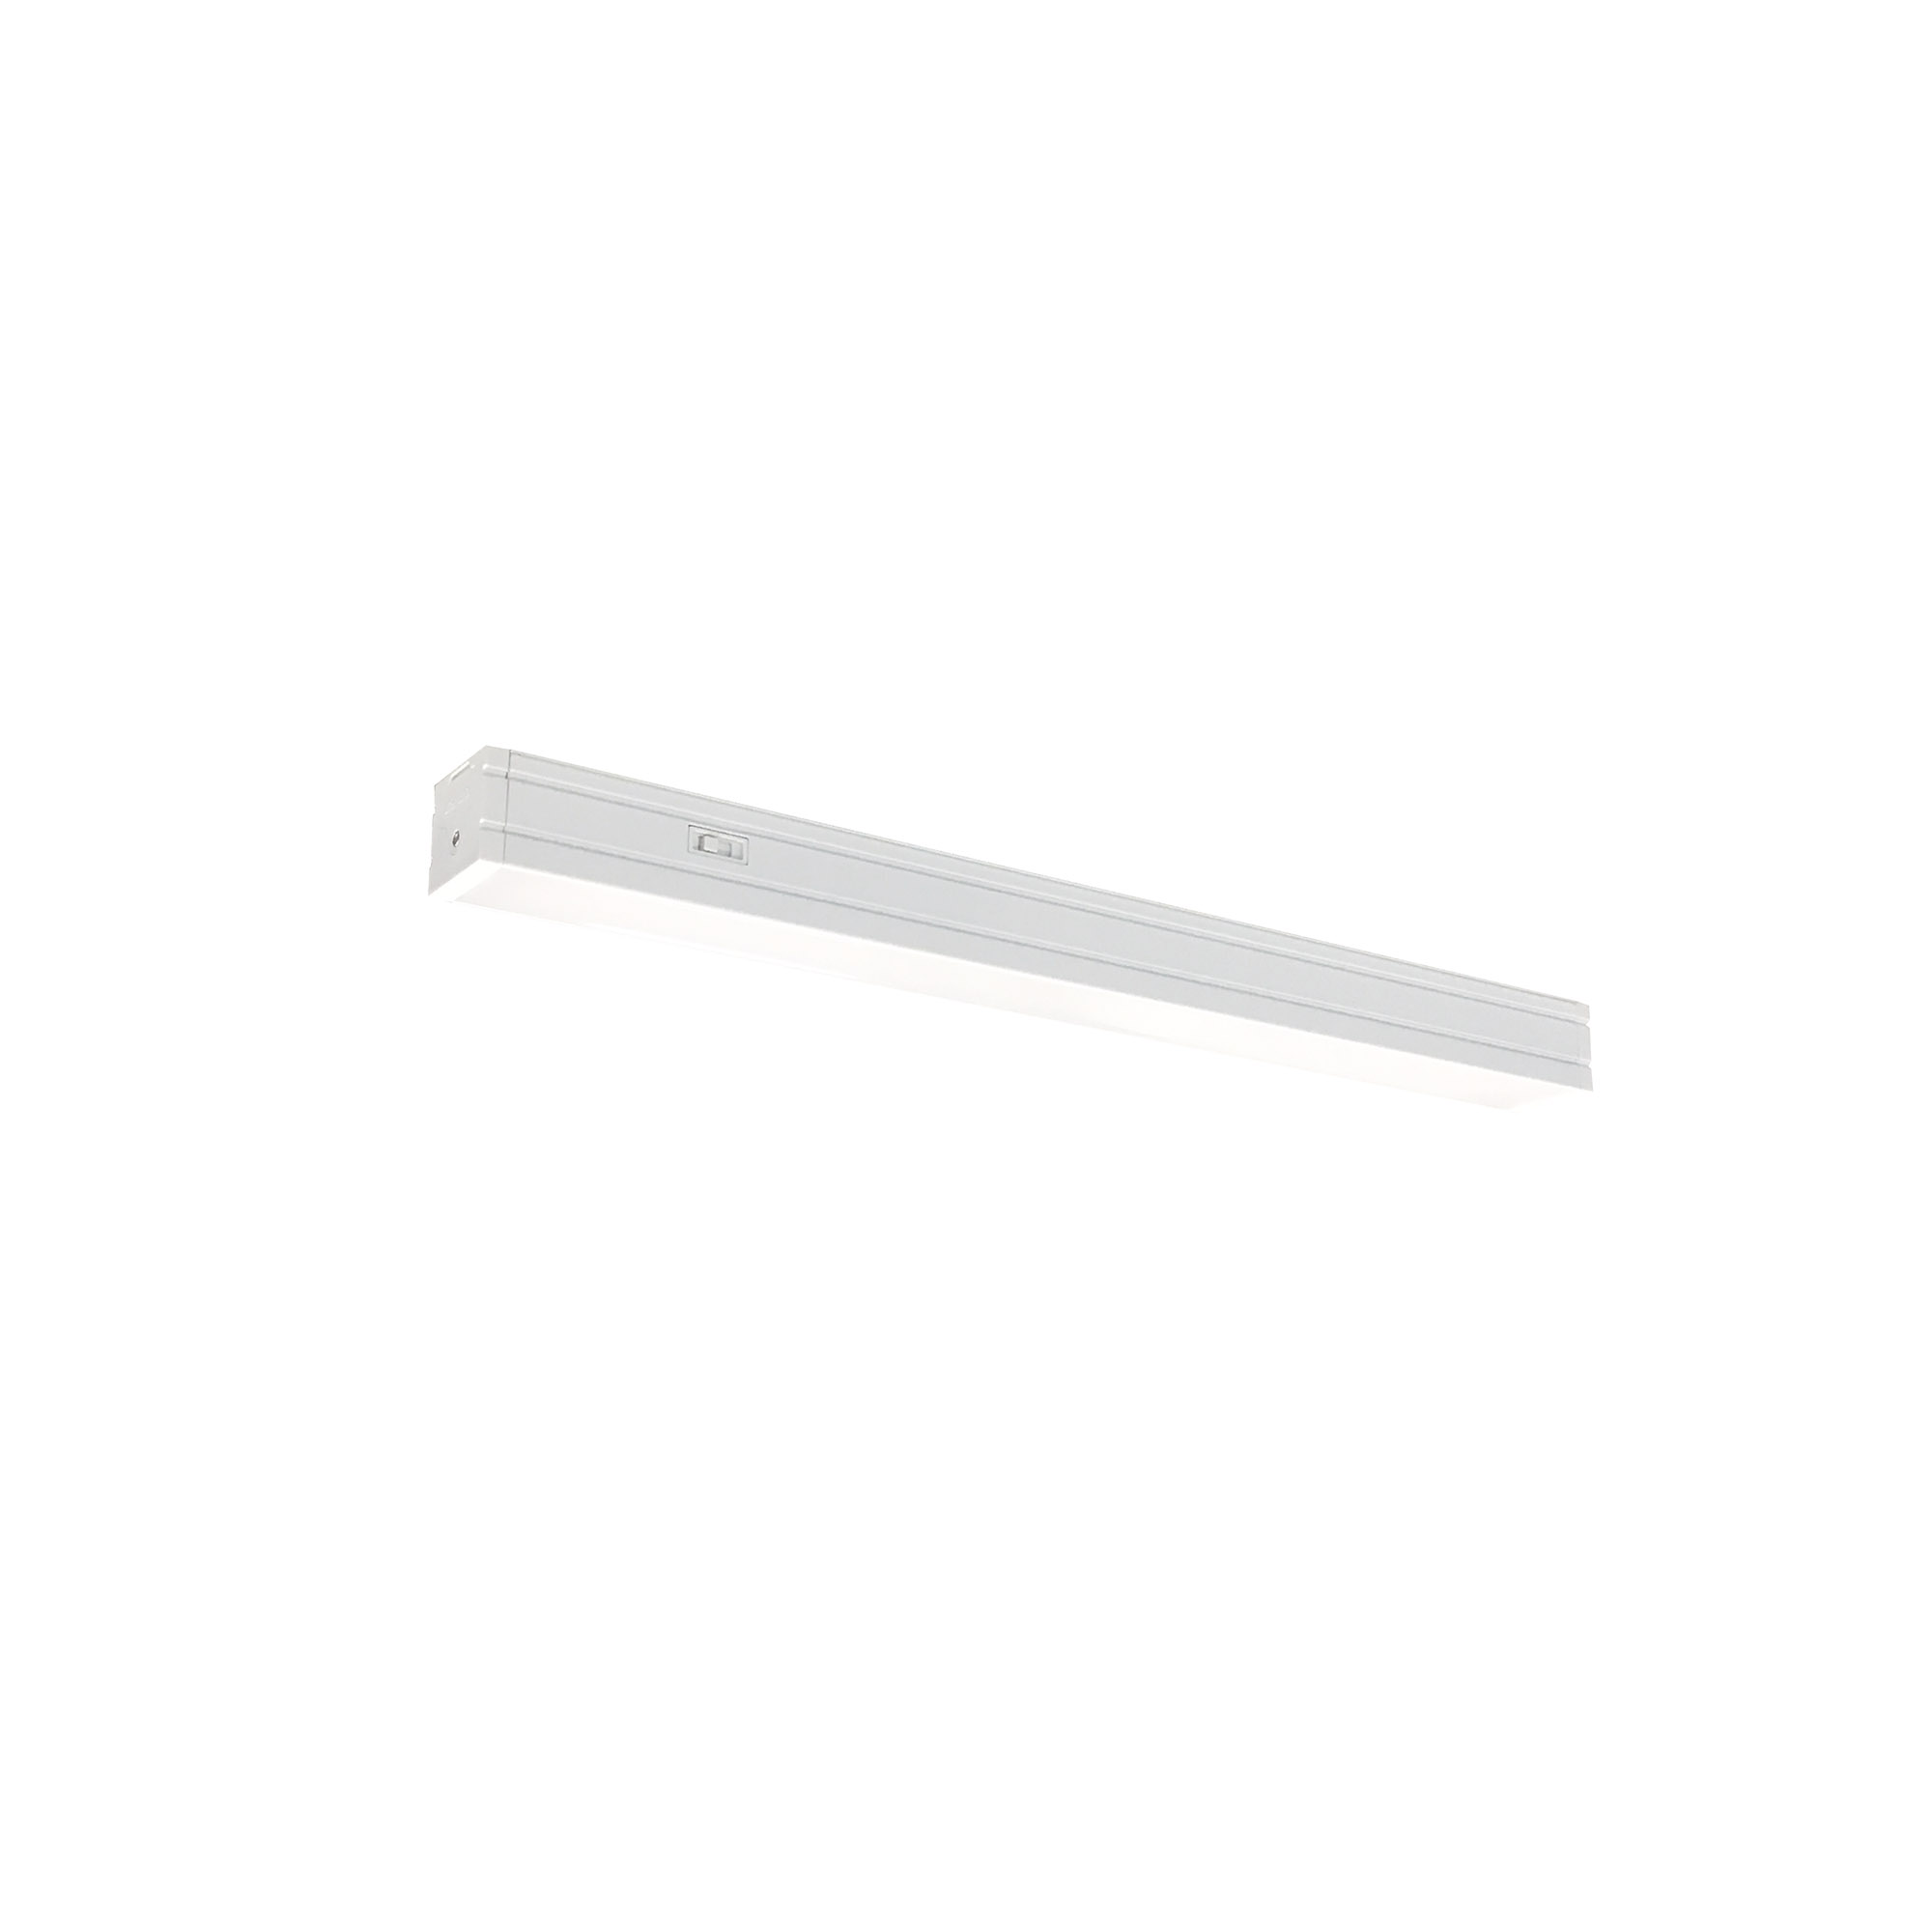 NUDTW-9824
20W CCT Sel 120V Dim White 24&quot; 
LED Linear Frosted Lens